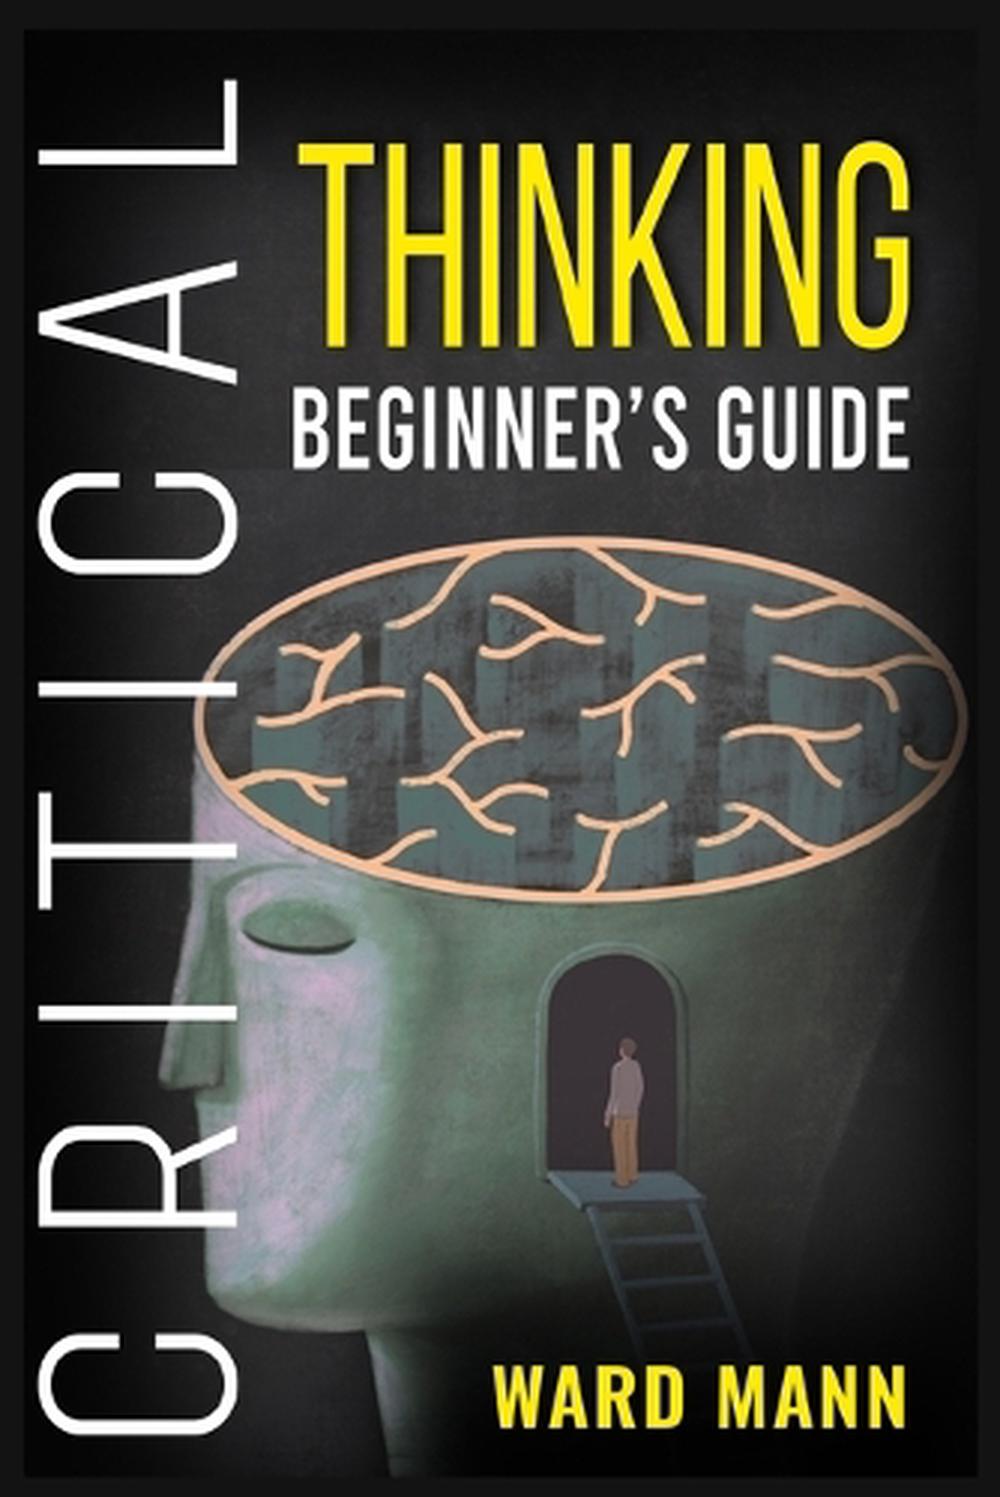 critical thinking beginner's guide